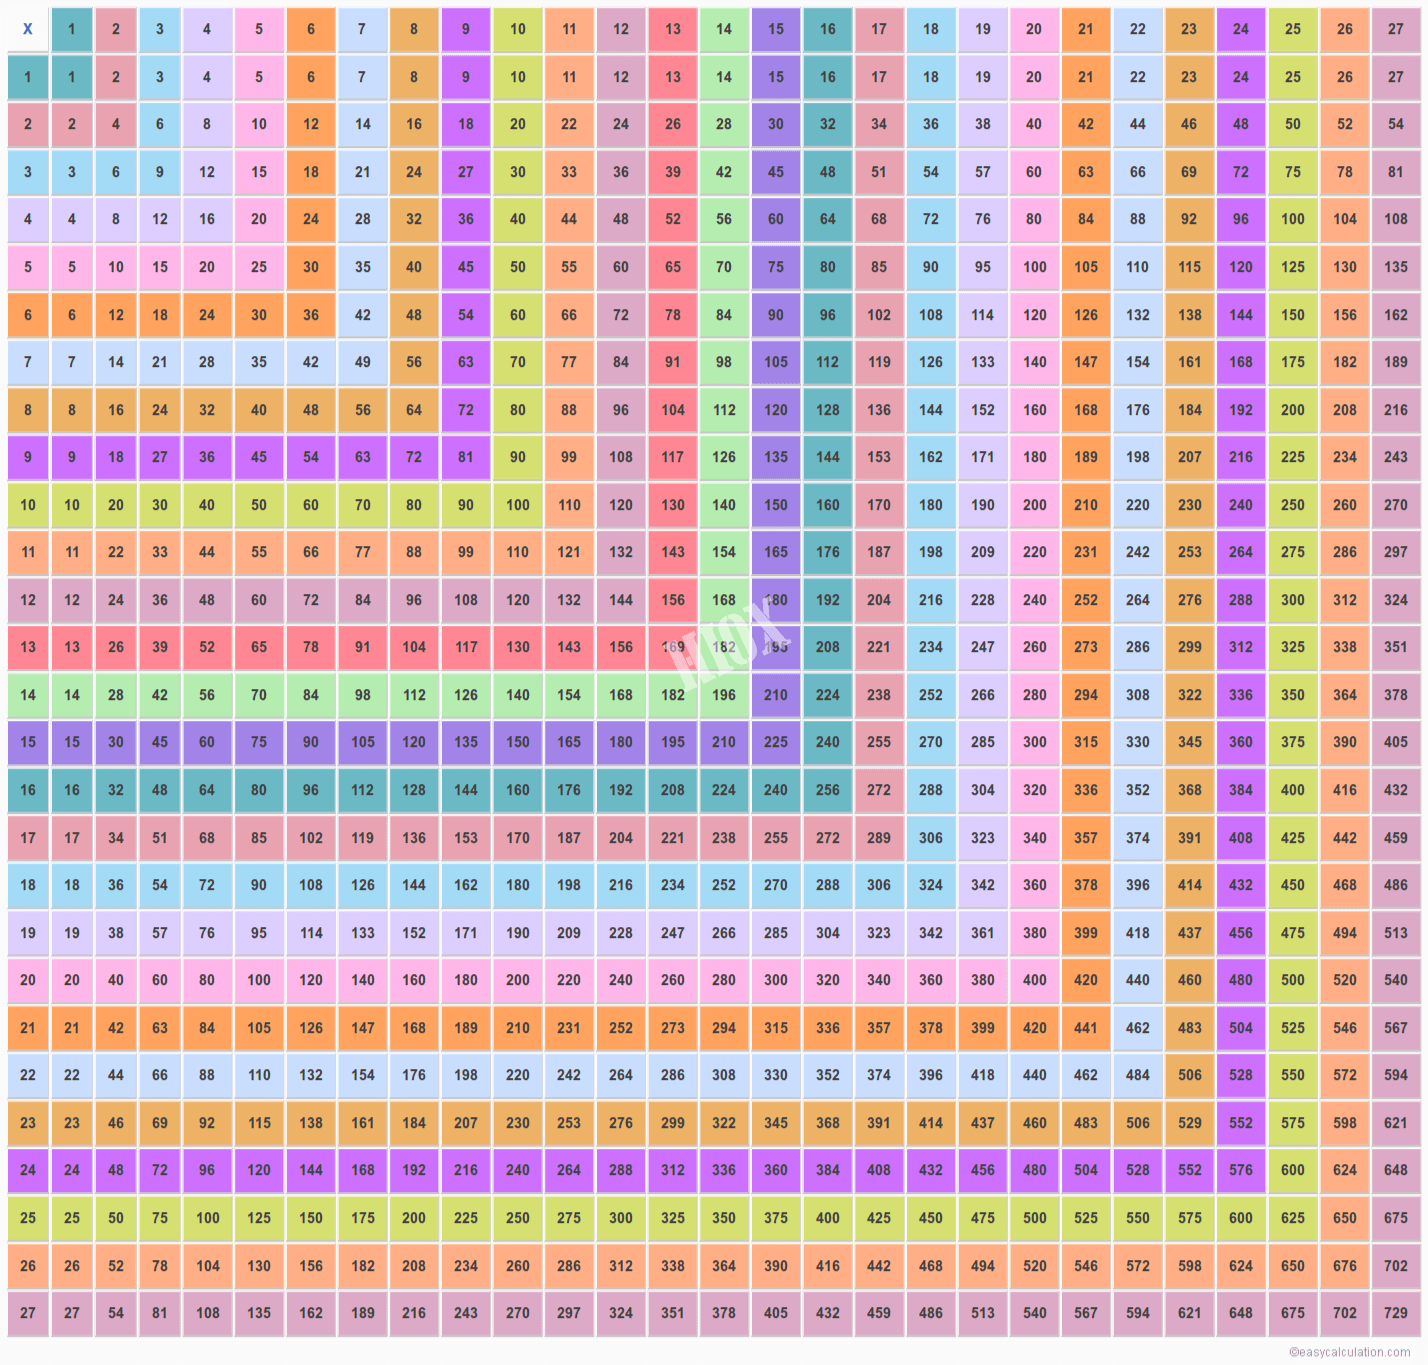 27X27 Multiplication Table | Multiplication Chart Up To 27